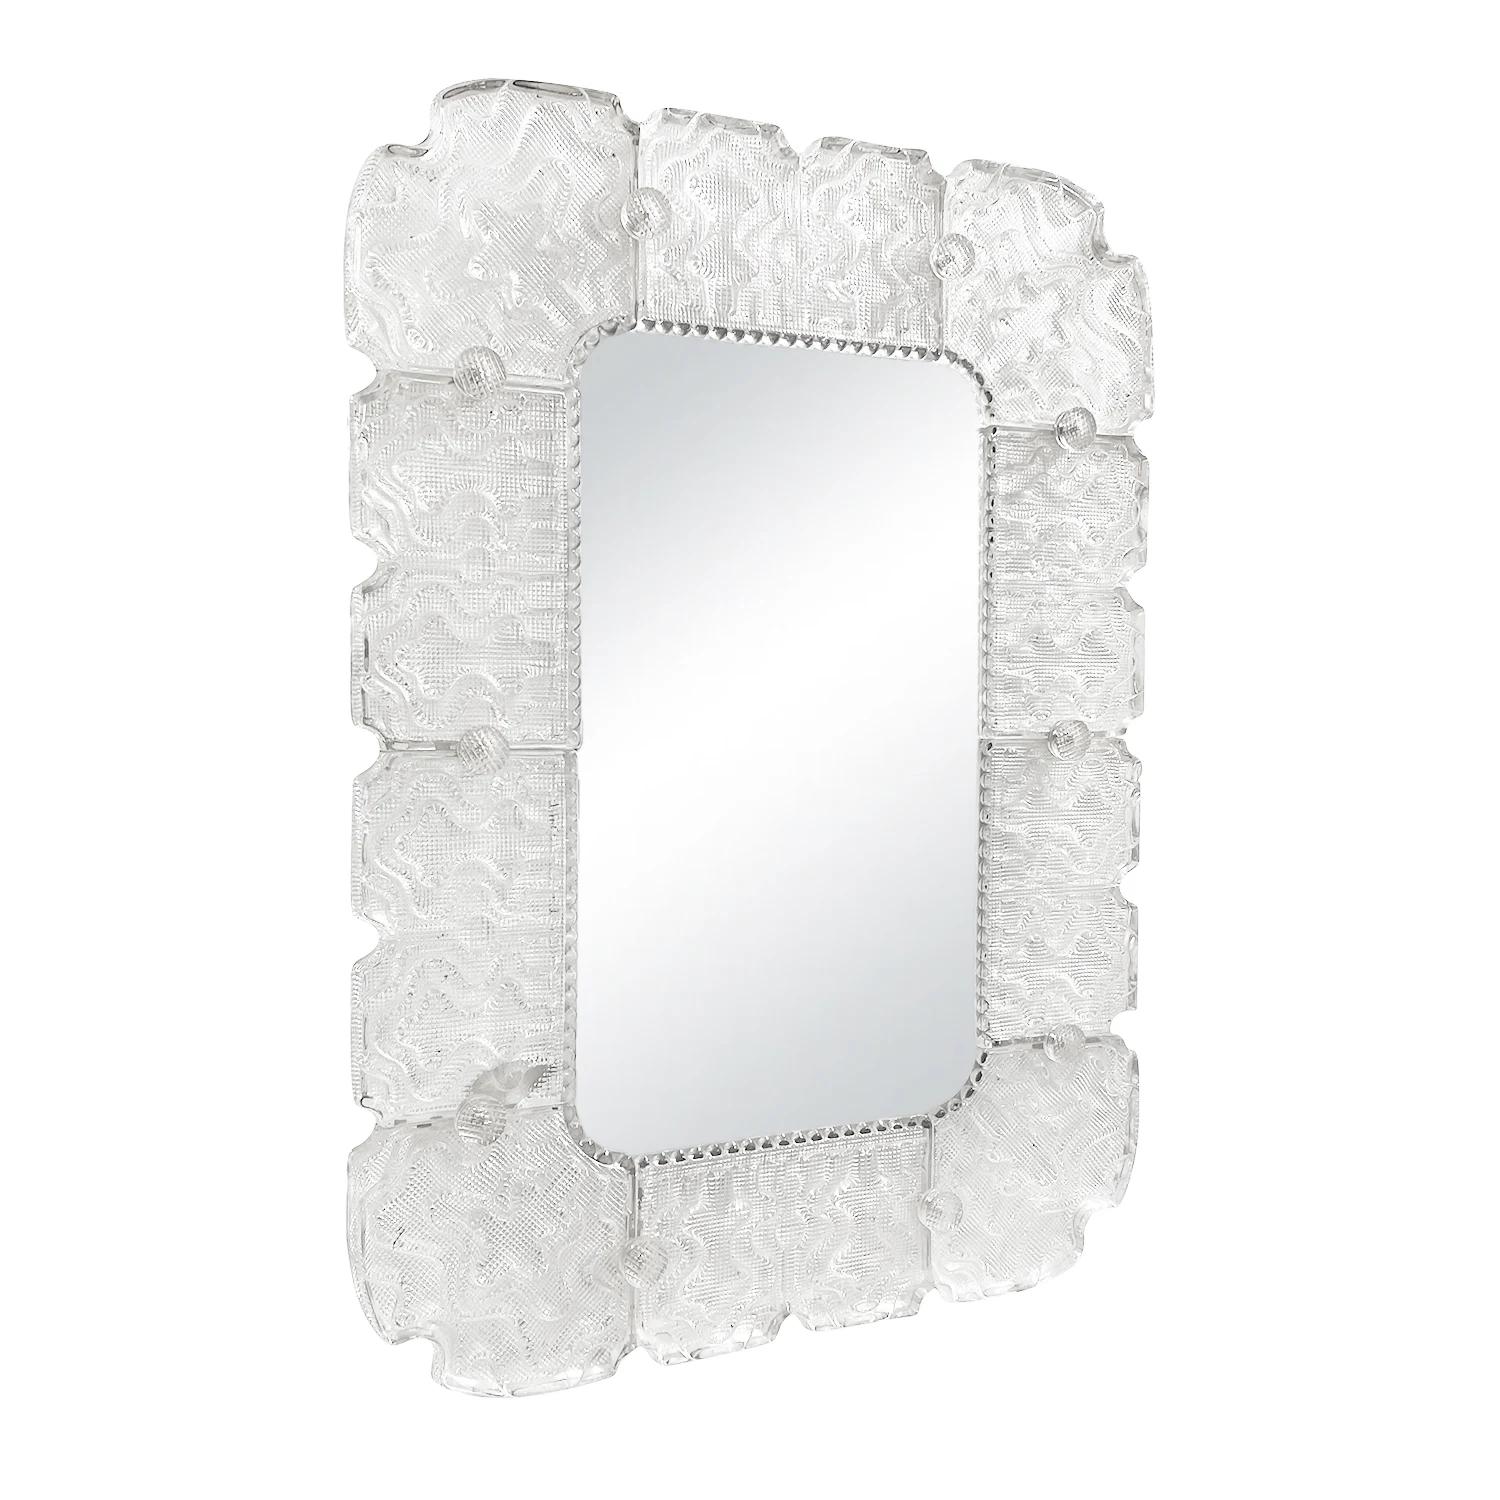 A rectangular, vintage Mid-Century modern Swedish wall mirror with its original mirror glass, made of hand blown smoked Orrefors glass, designed by Carl Fagerlund and produced by Orrefors in good condition. Each glass piece of the Scandinavian wall